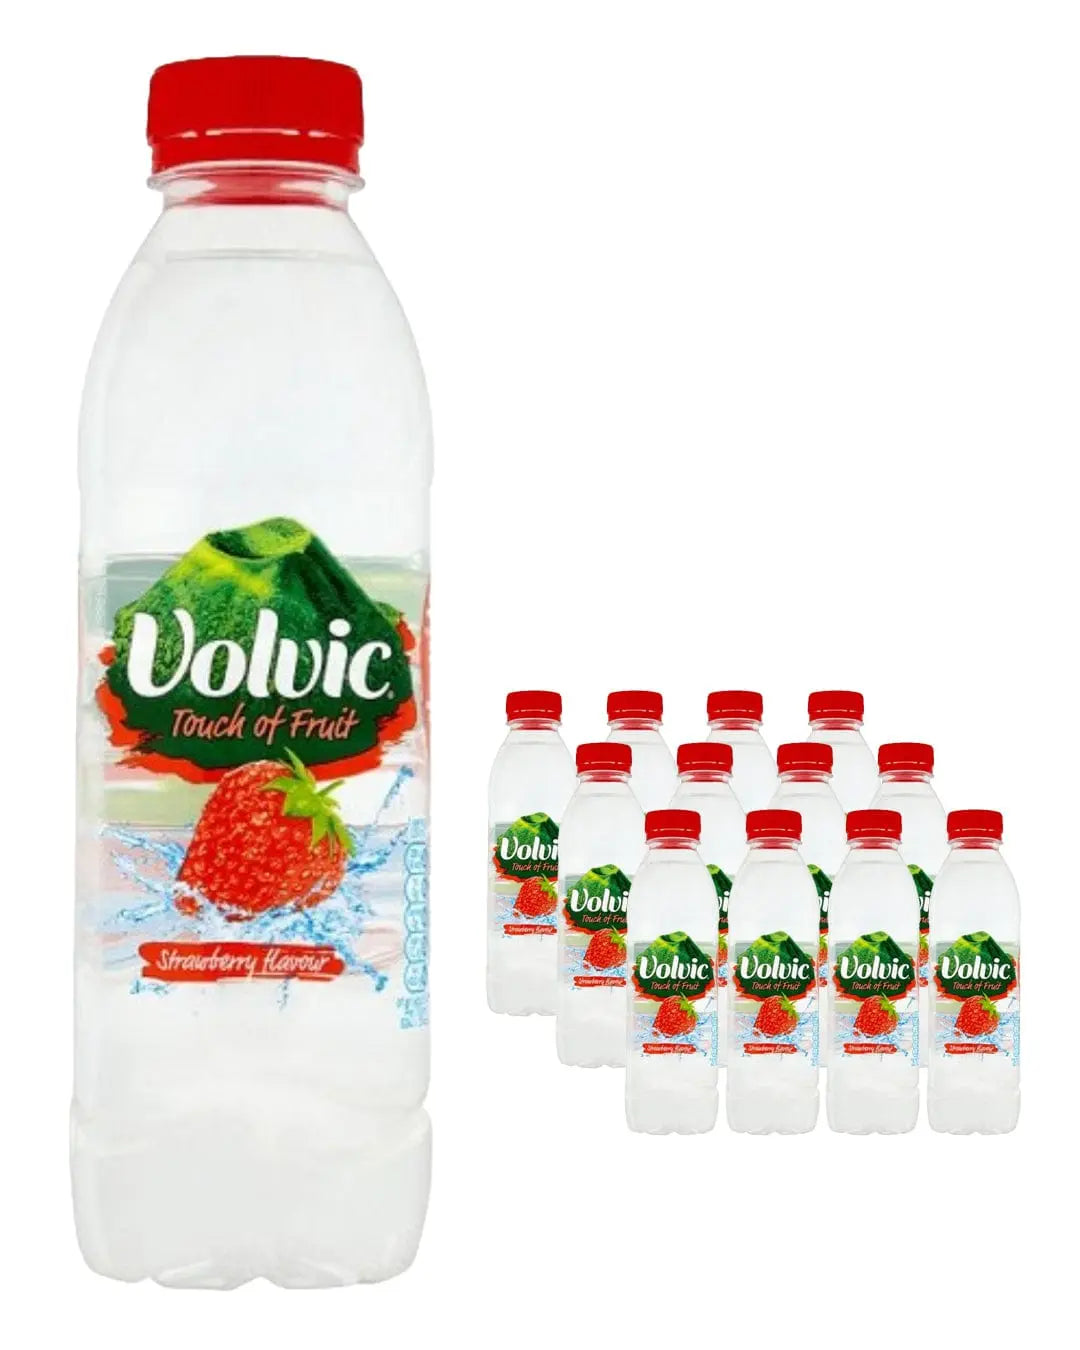 Volvic Touch of Fruit Strawberry Multipack, 12 x 500 ml Water